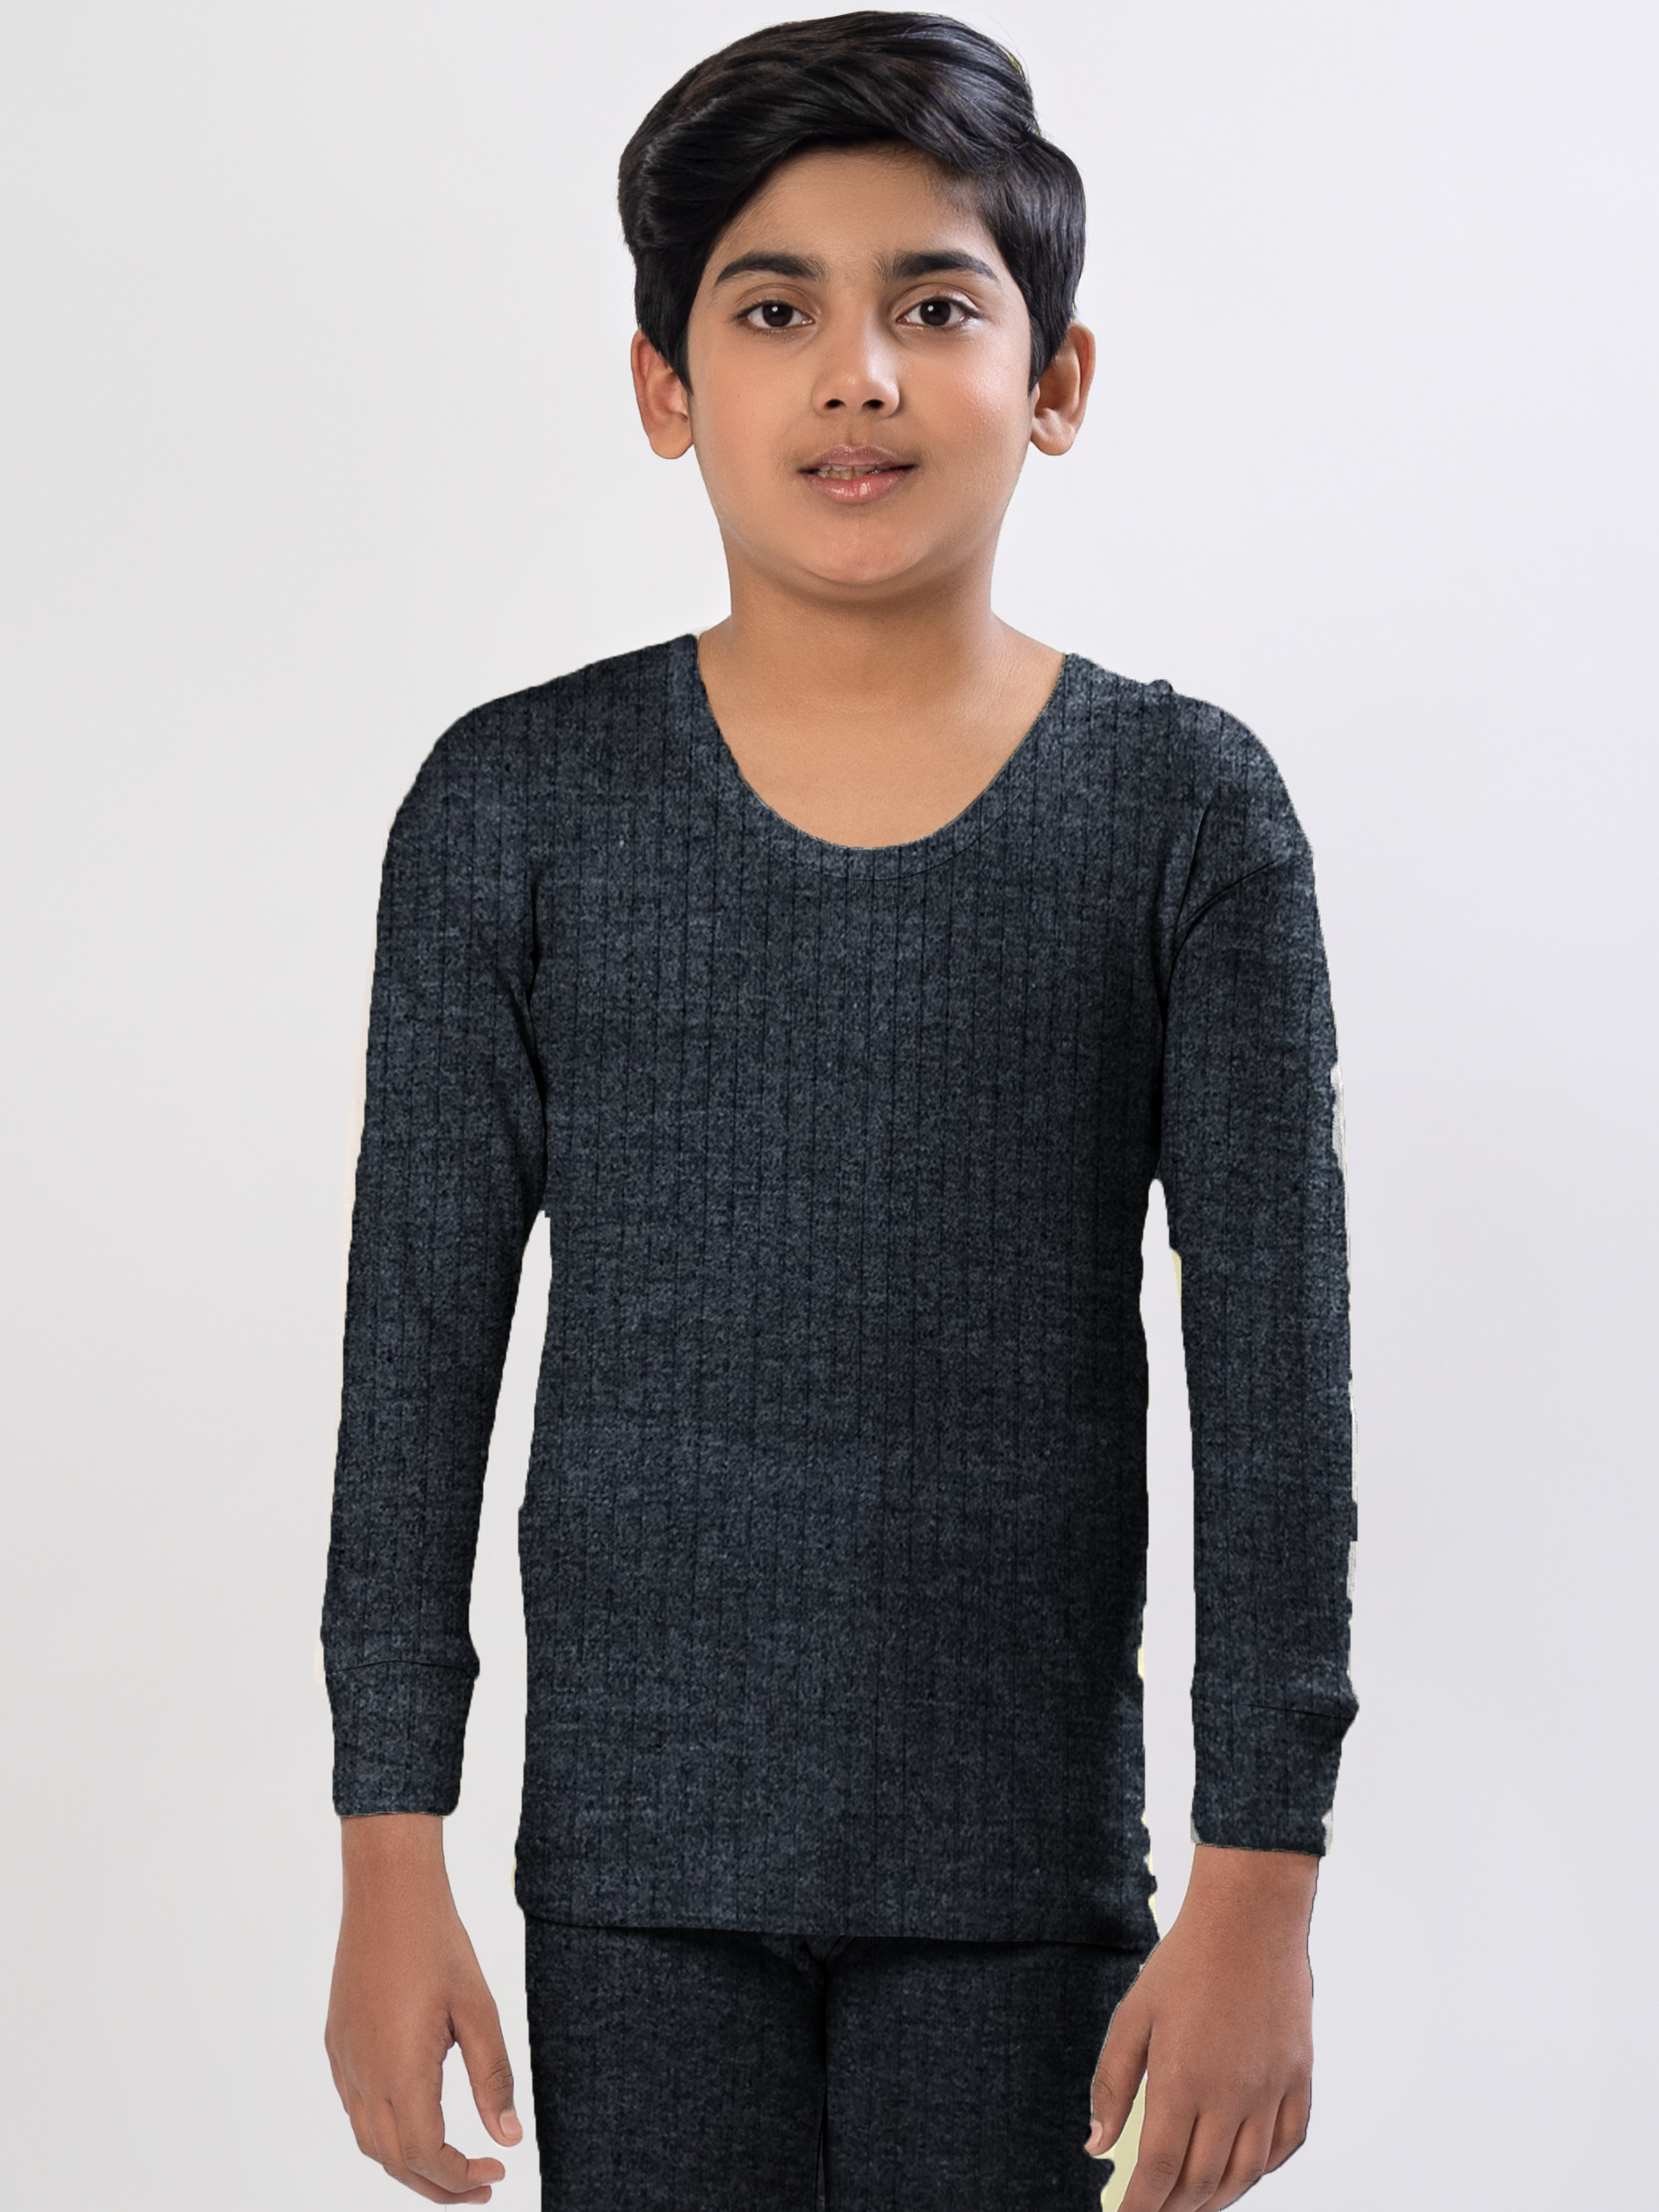 Kids Classic Thermal Top (Charcoal)